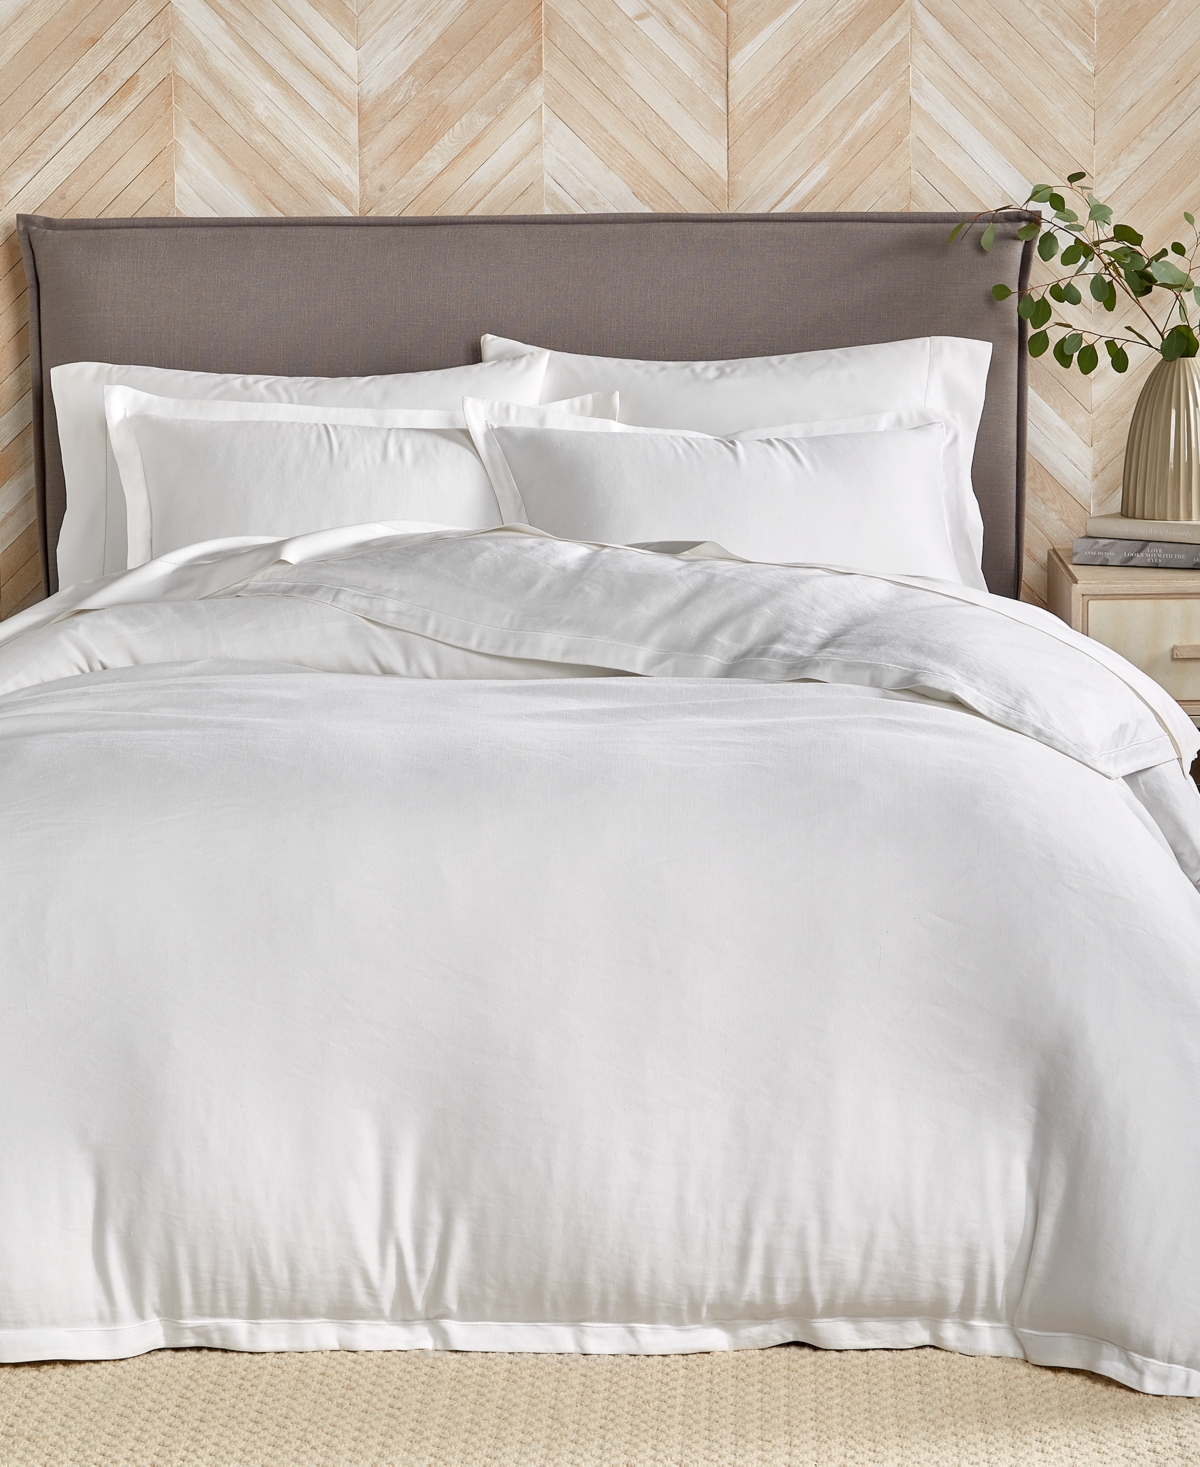 Hotel Collection Linen/modal Blend 3-pc. Duvet Cover Set, Full/queen, Created For Macy's In White